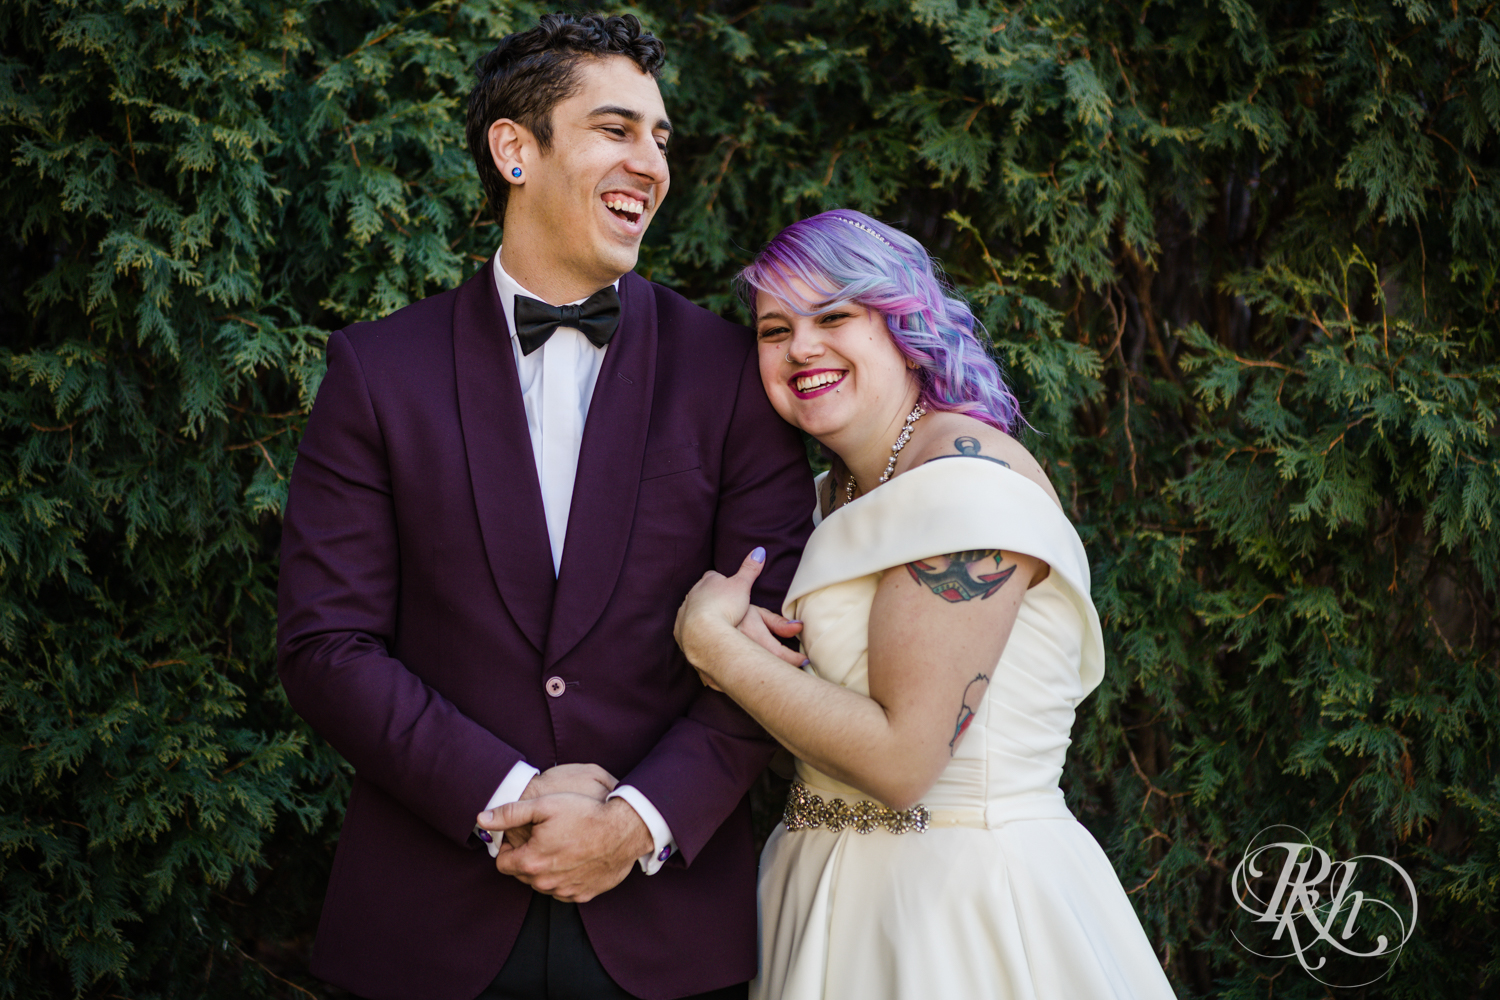 Bride with rainbow hair and groom in maroon suit laugh at the Saint Paul Hotel in Saint Paul, Minnesota.